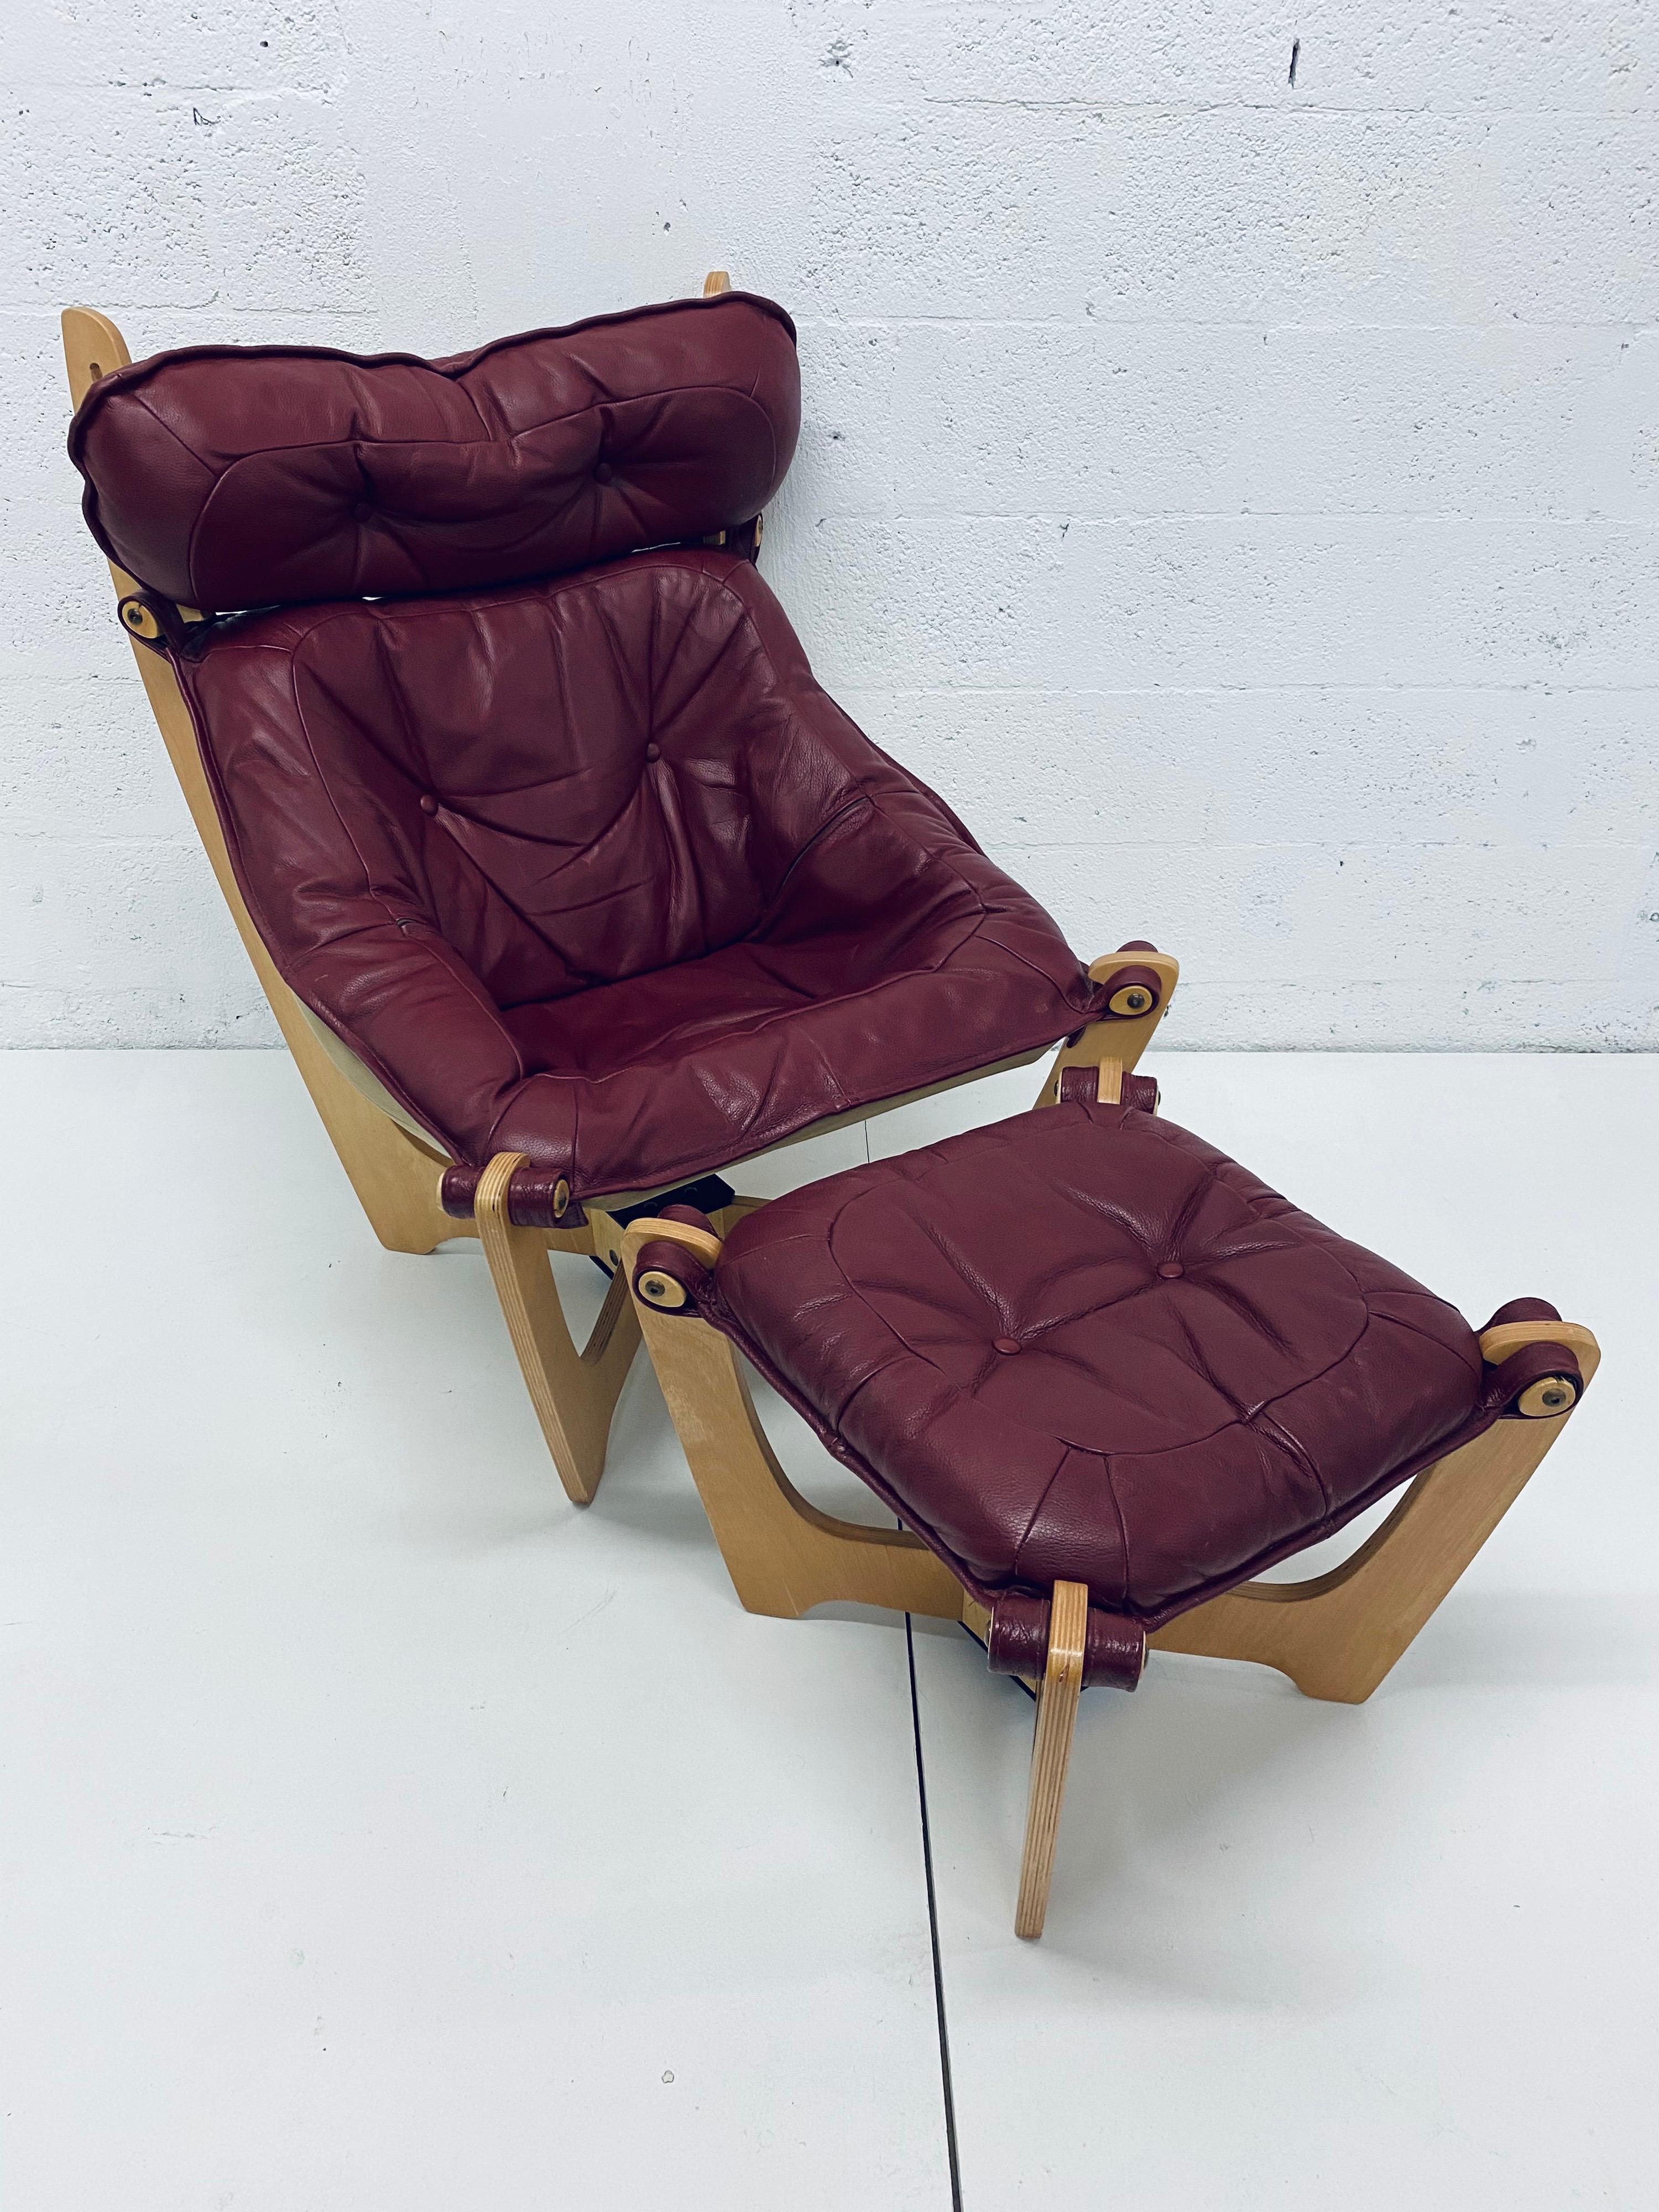 Oxblood leather sling seat suspended from a light blonde stained wood frame with footrest by Odd Knutsen for Hjellegjerde.

Dimensions:
Chair W 29.5